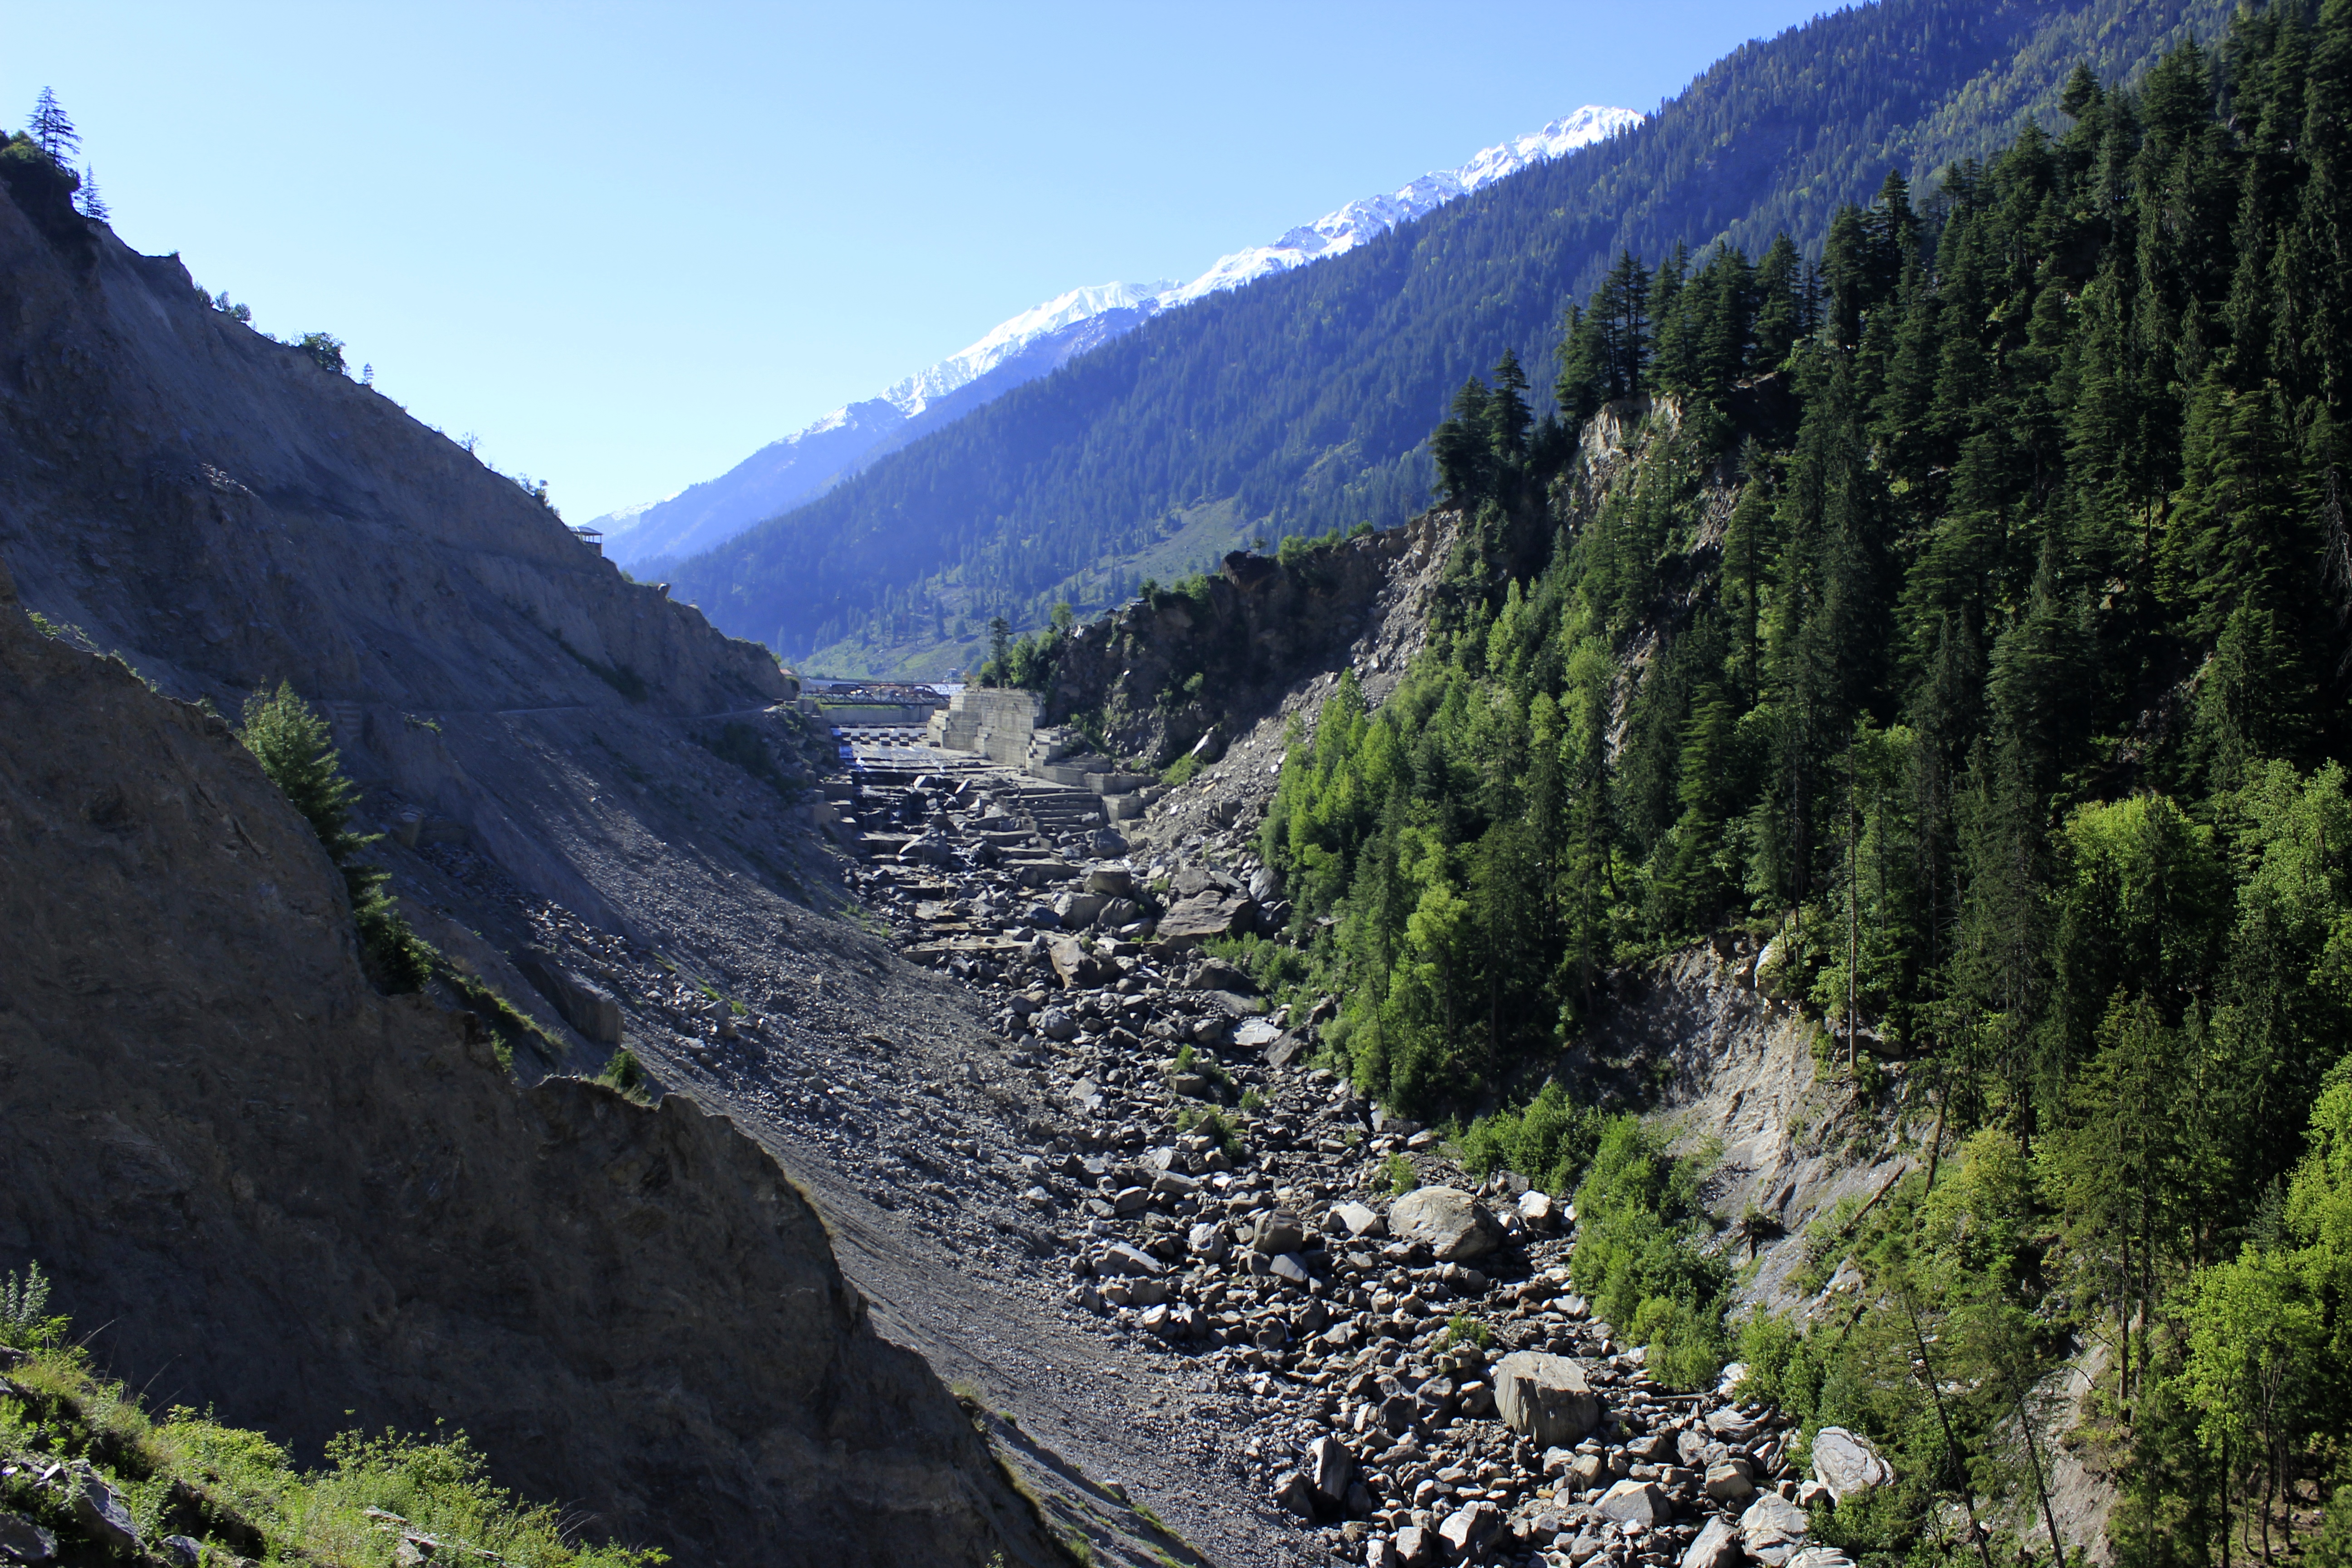 Landslides downstream of the 300 MW Baspa project constructed in Sangla Valley of Kinnaur.                                                                                                                                         Pic Date : 28/05/2014